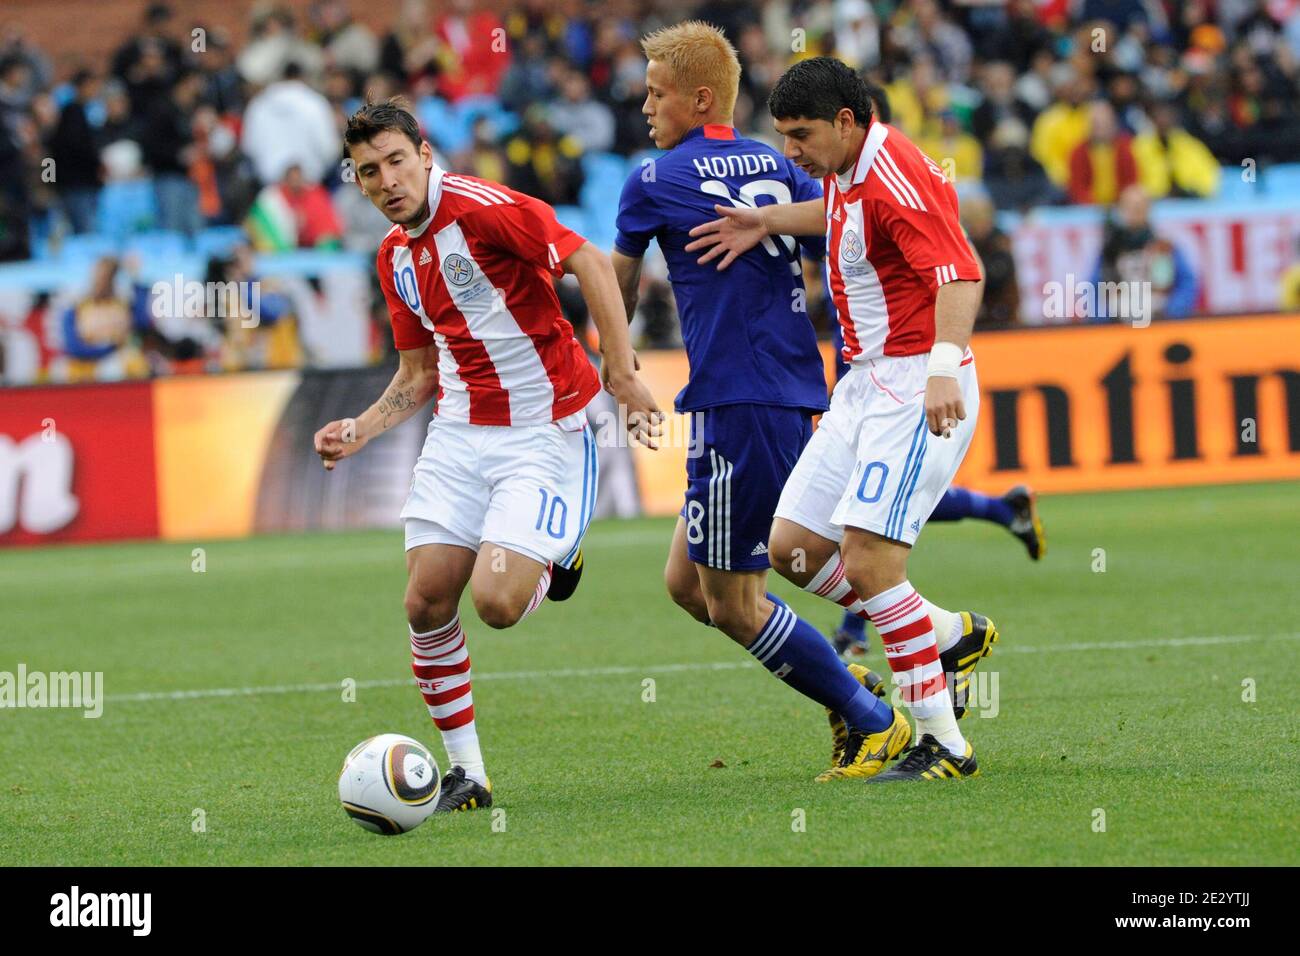 Paraguay's Edgar Benitez and Mestor Ortigoza fight for the ball Japan's Keisuke Honda during the 2010 FIFA World Cup South Africa 1/8 of final Soccer match, Paraguay vs Japan at Loftus Versfeld football stadium in Pretoria, South Africa on June 29, 2010. Paraguay won 0-0 (5p to 3 after penalties). Photo by Henri Szwarc/ABACAPRESS.COM Stock Photo